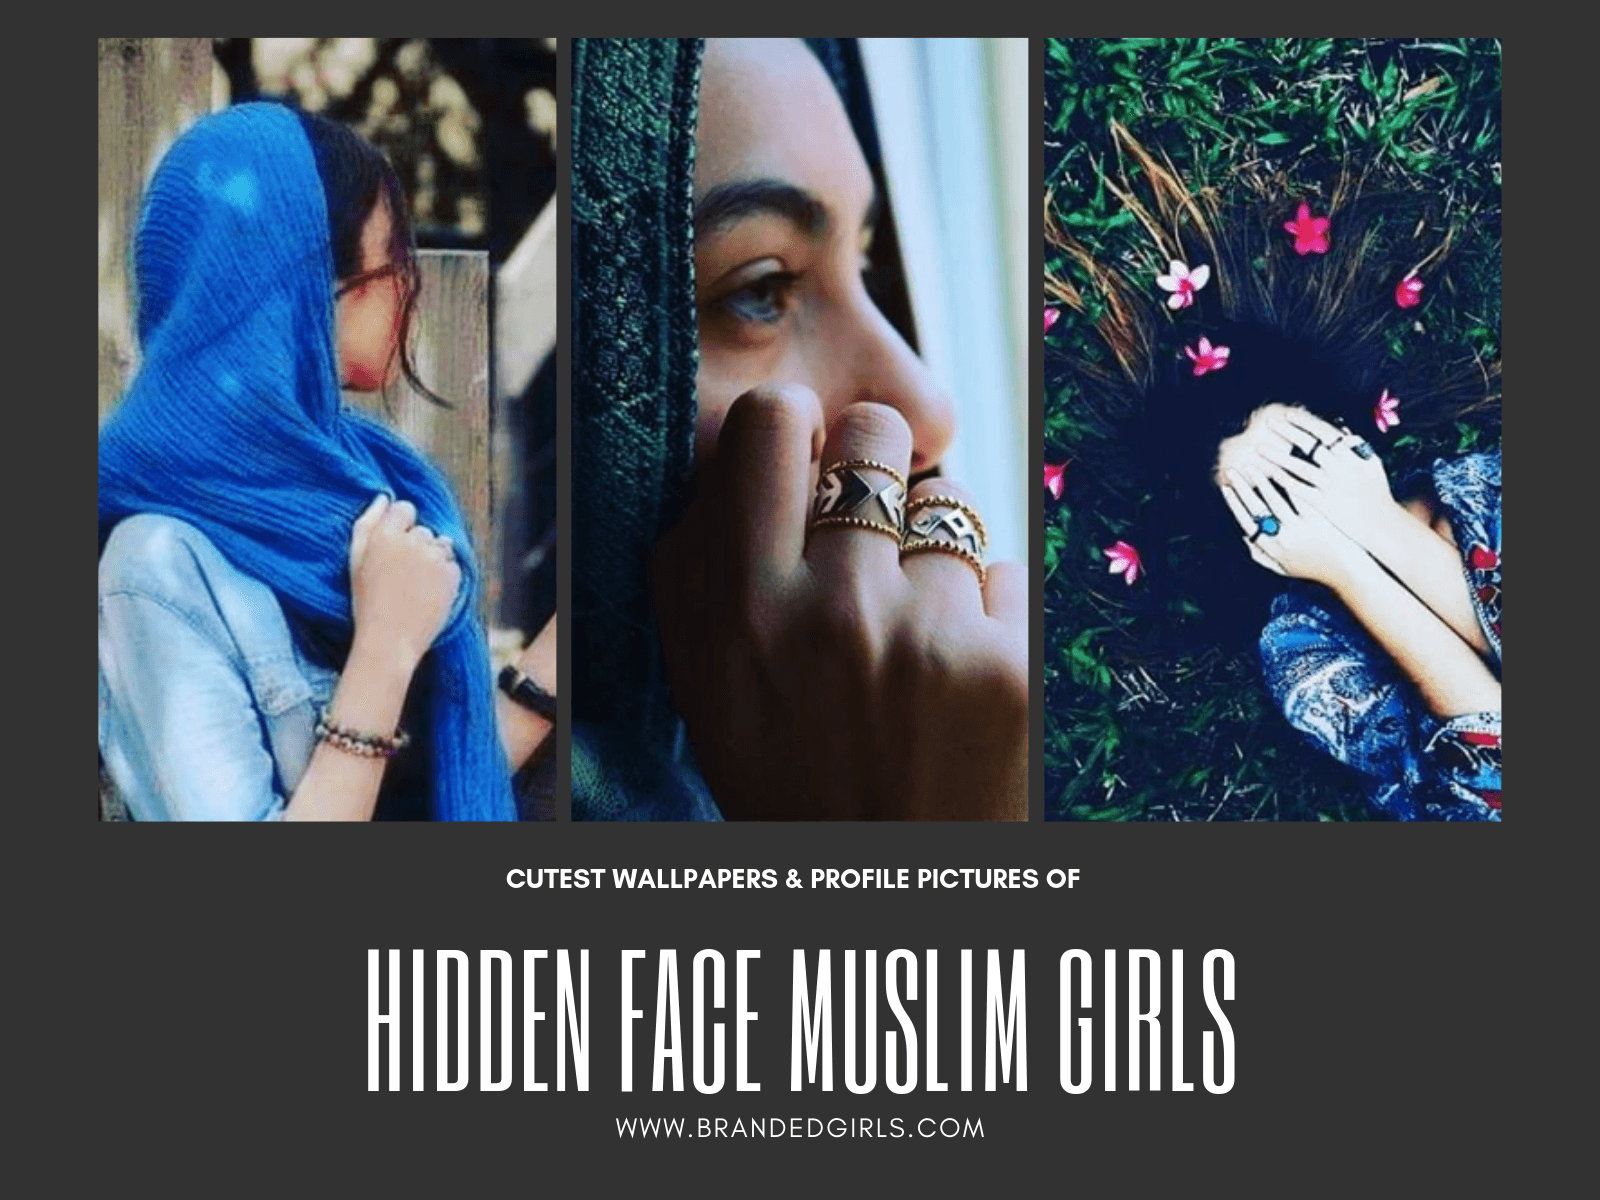 32 Hidden Face Muslim Girls Wallpapers & Profile Pictures